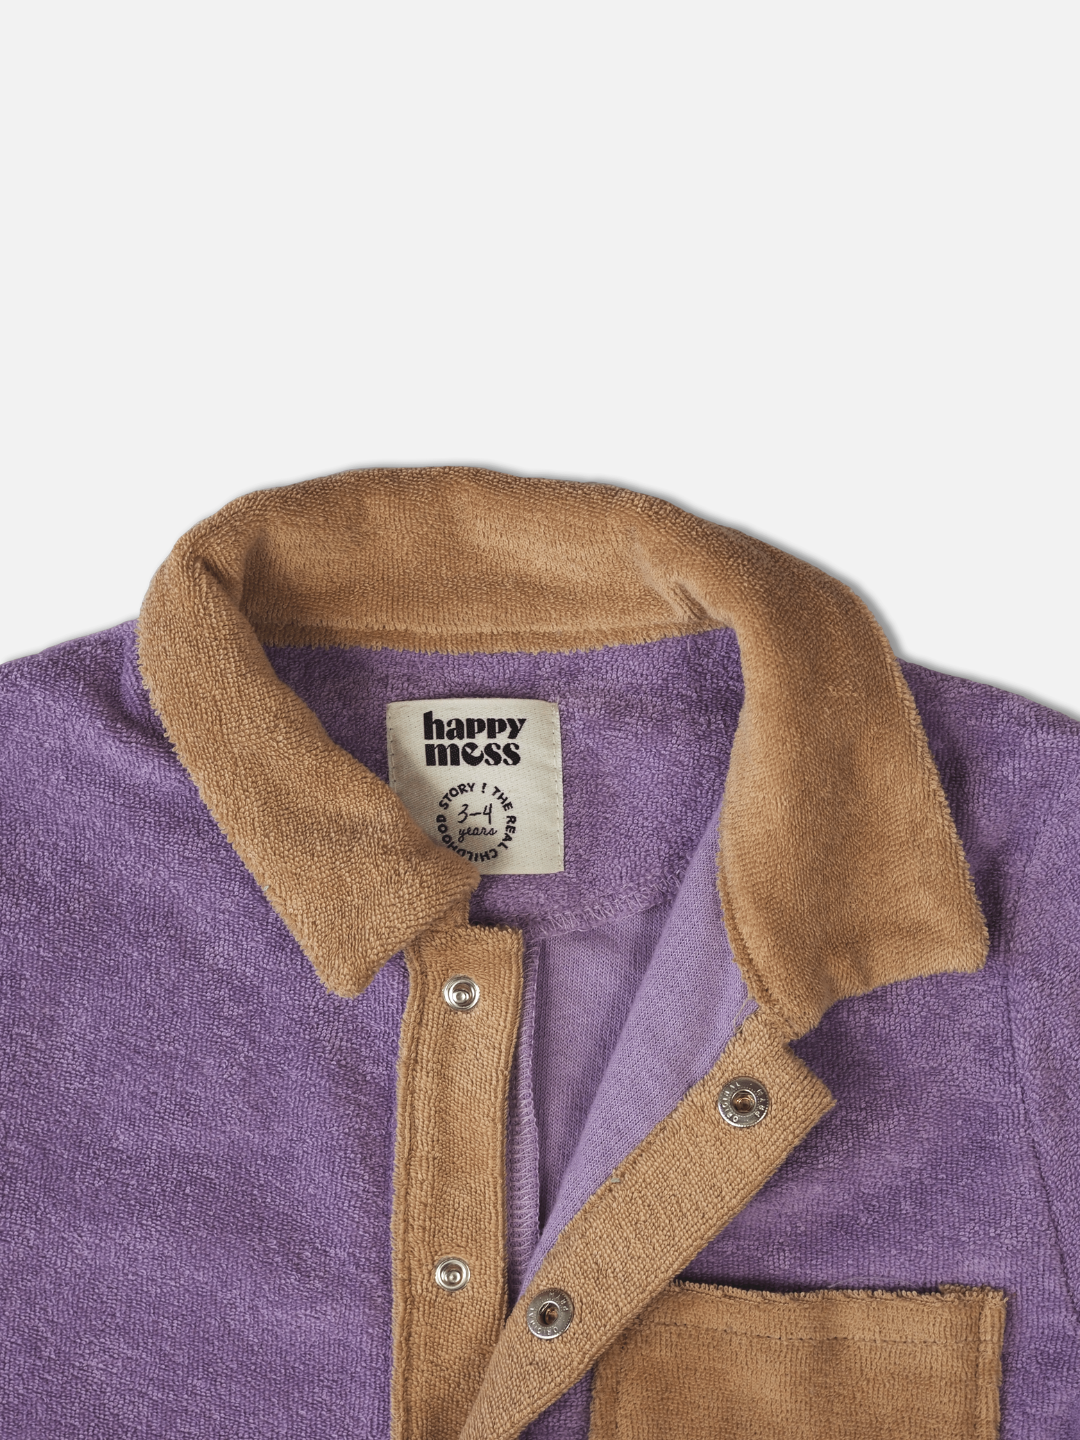 Plum | Detail of kids' jumpsuit in pale plum with sand collar, placket over snap fasteners, and pockets